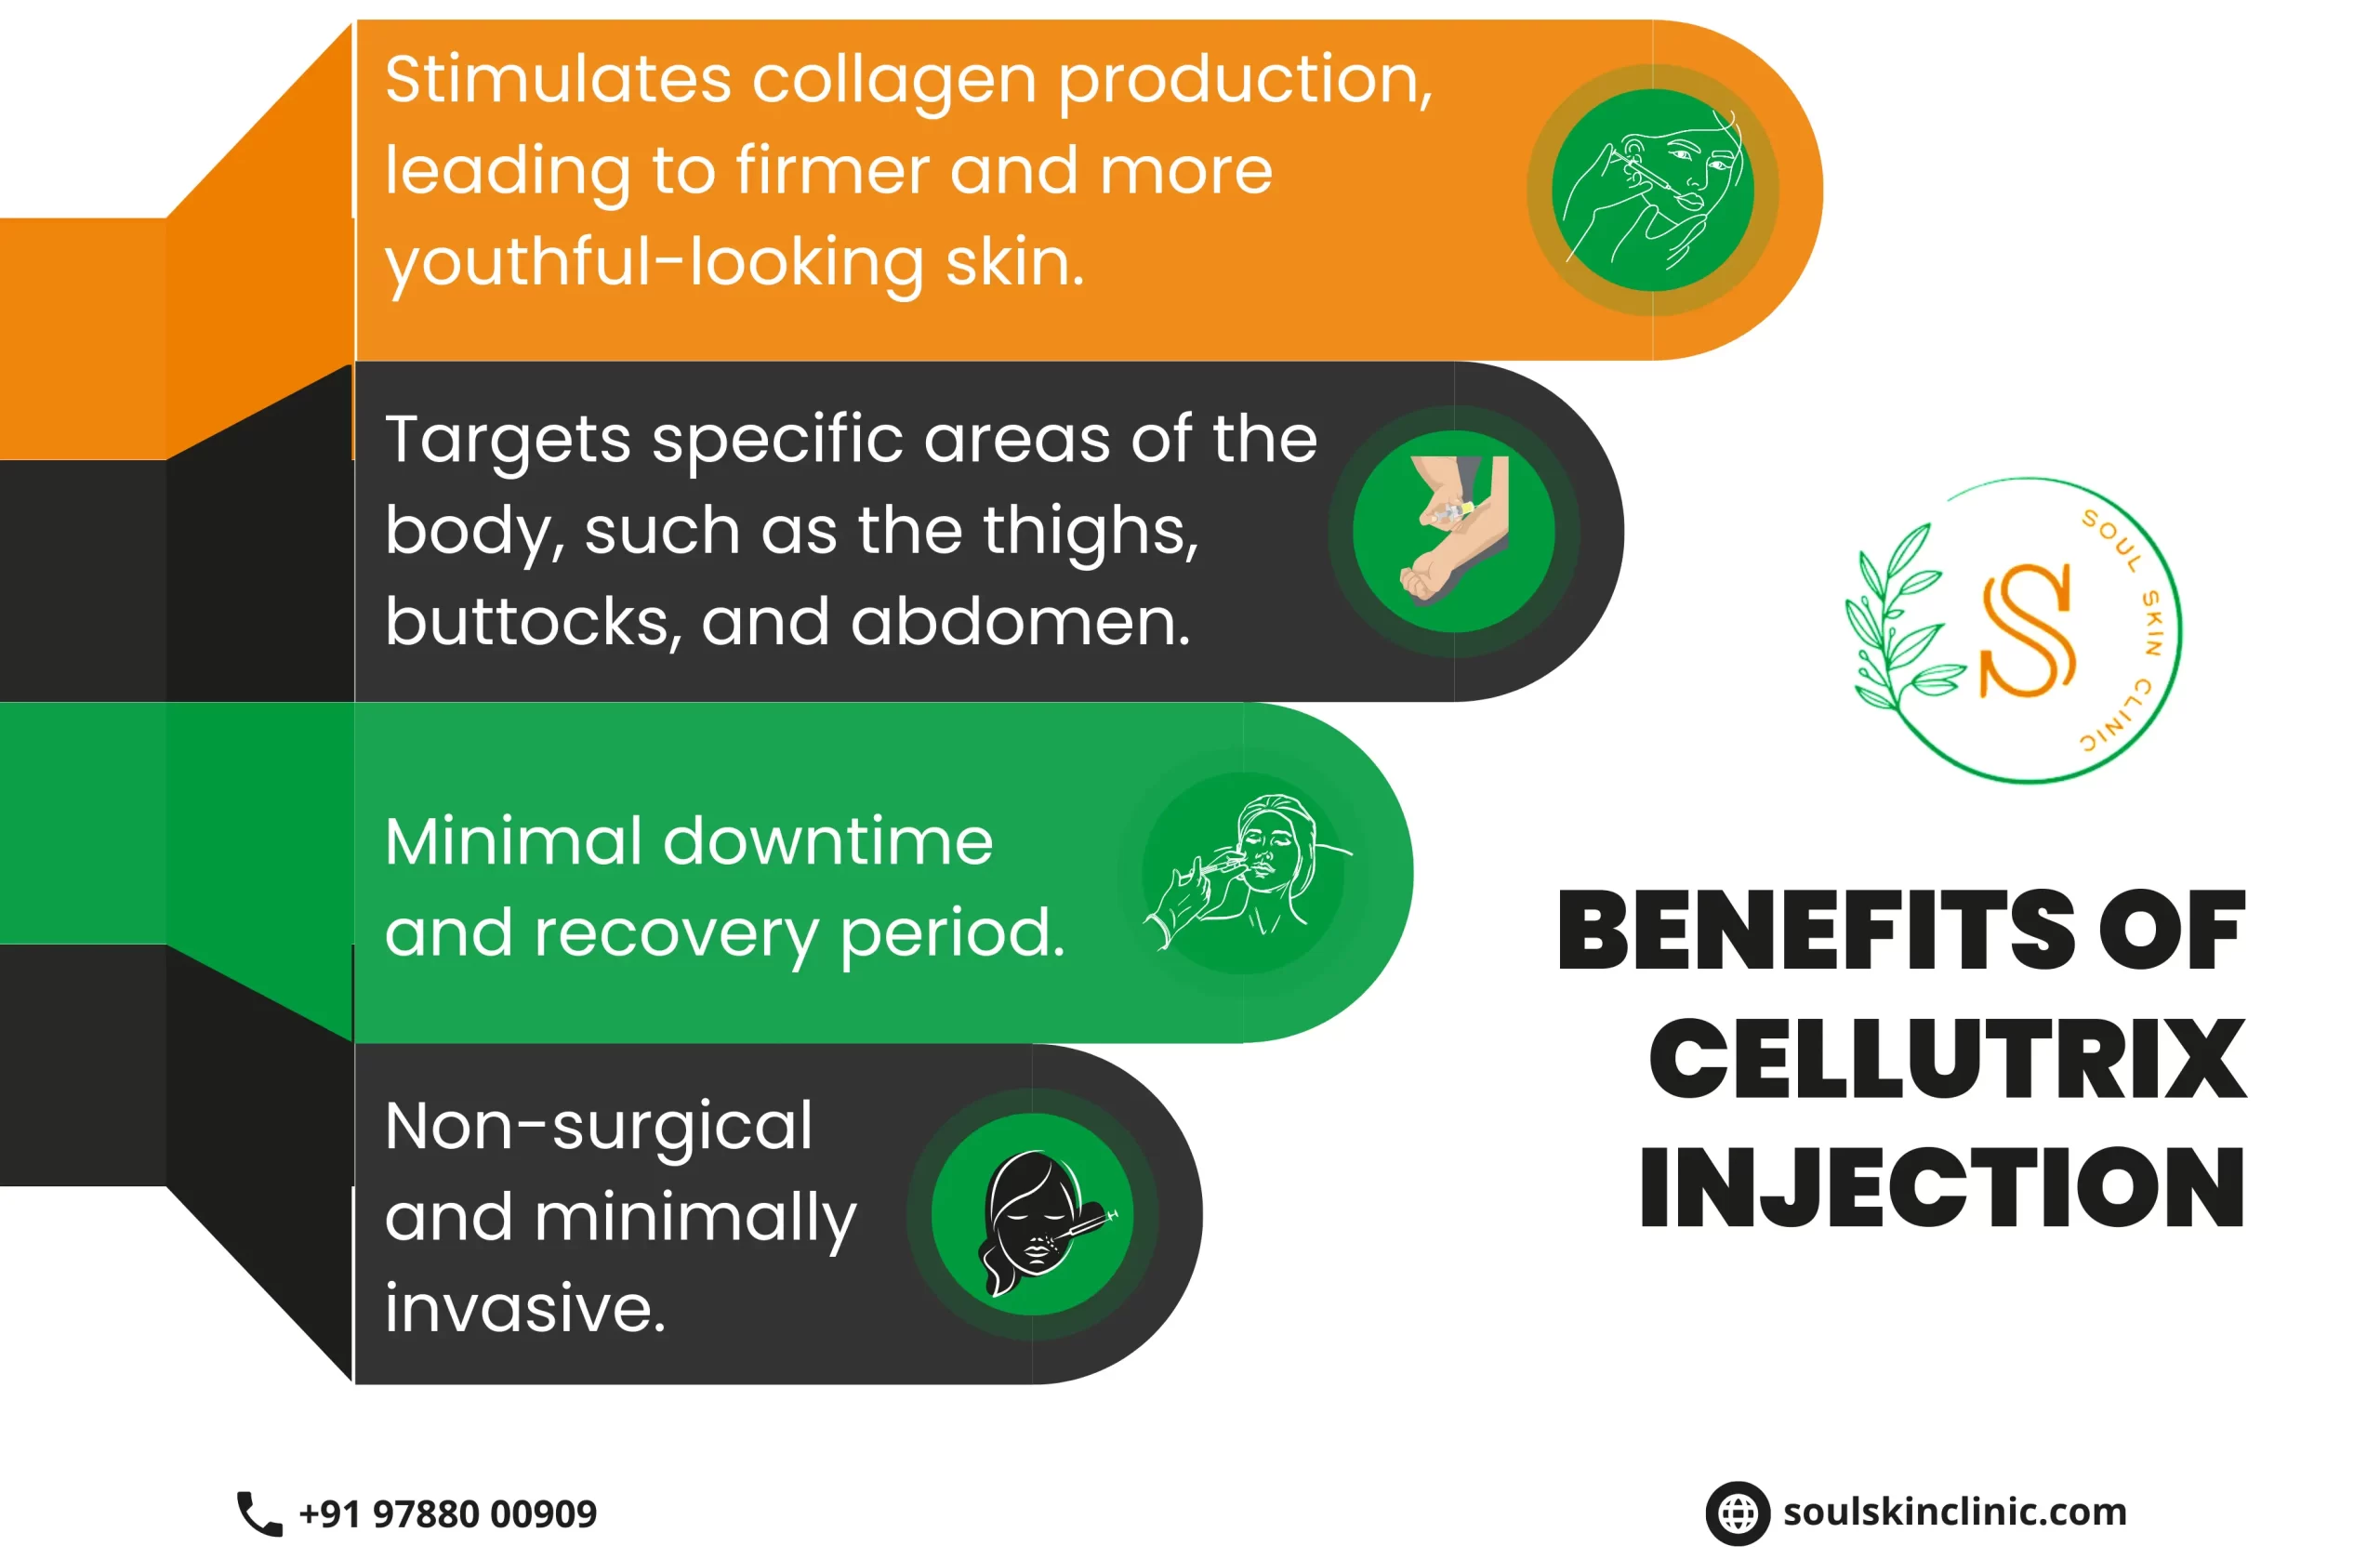 Cellutrix Injection in Chennai | Soul Skin Clinic